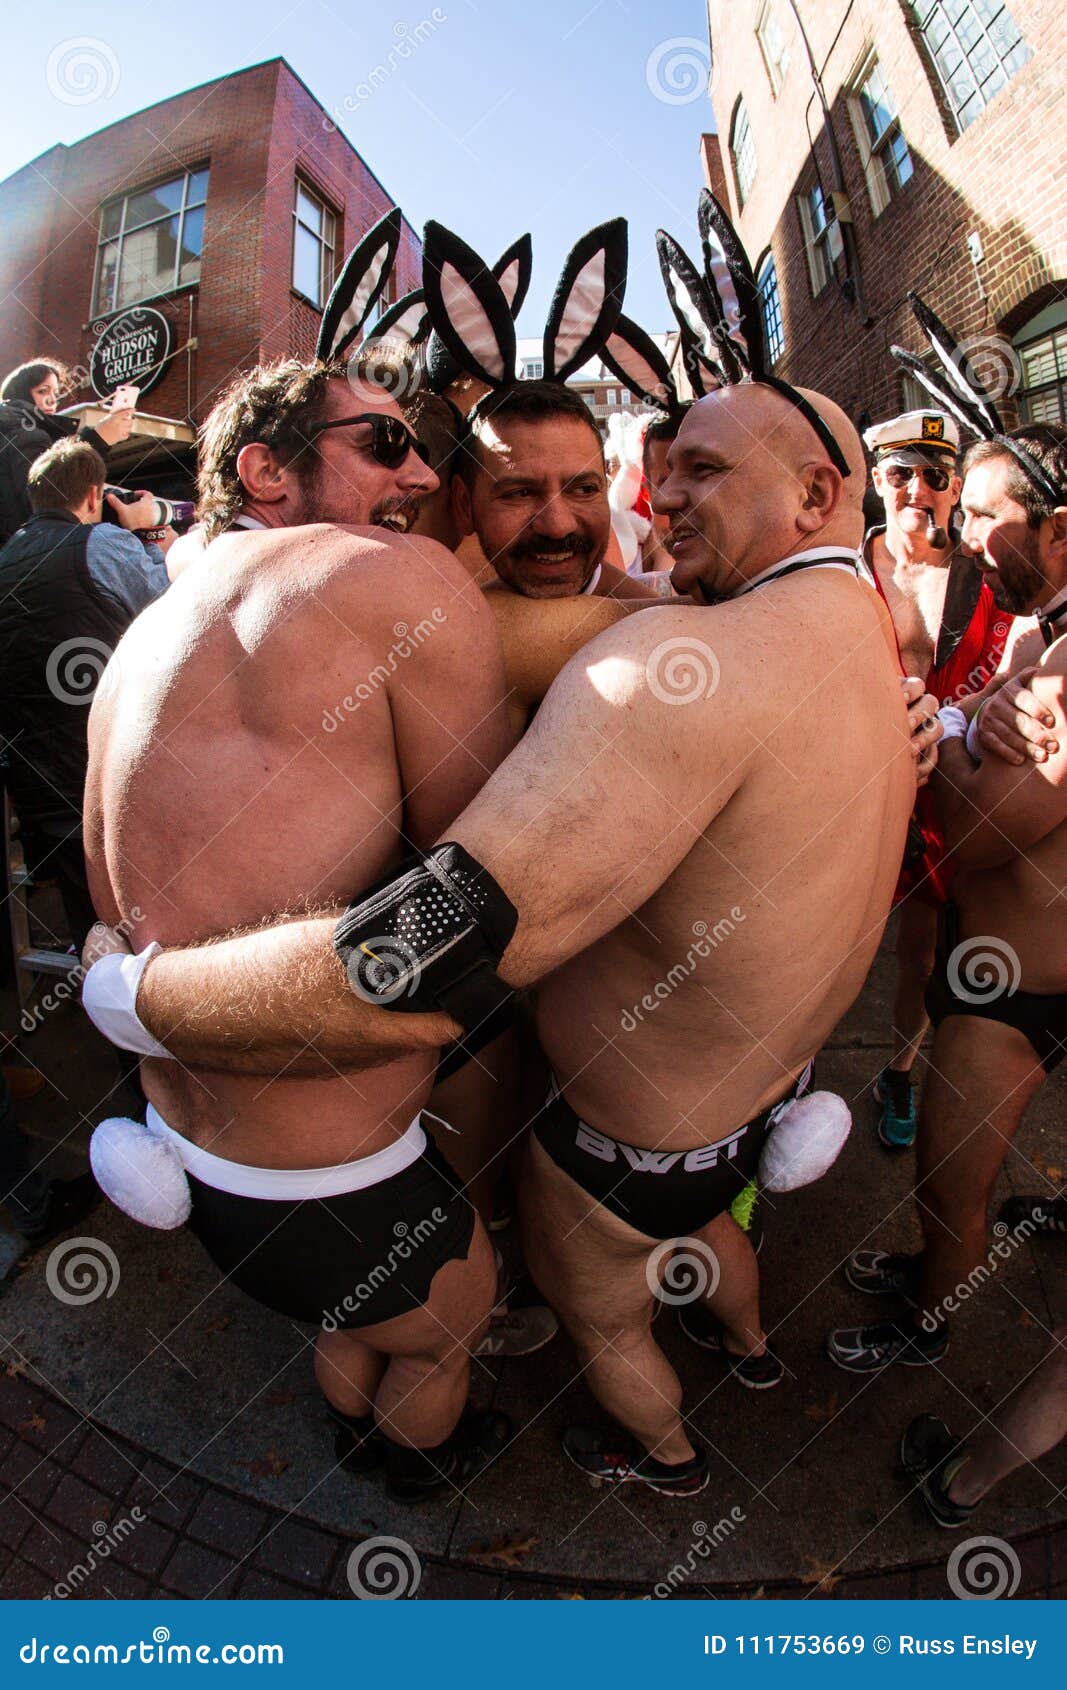 Men Speedos and Playboy Bunny Accessories Shiver before Event Editorial Image - of group, 111753669